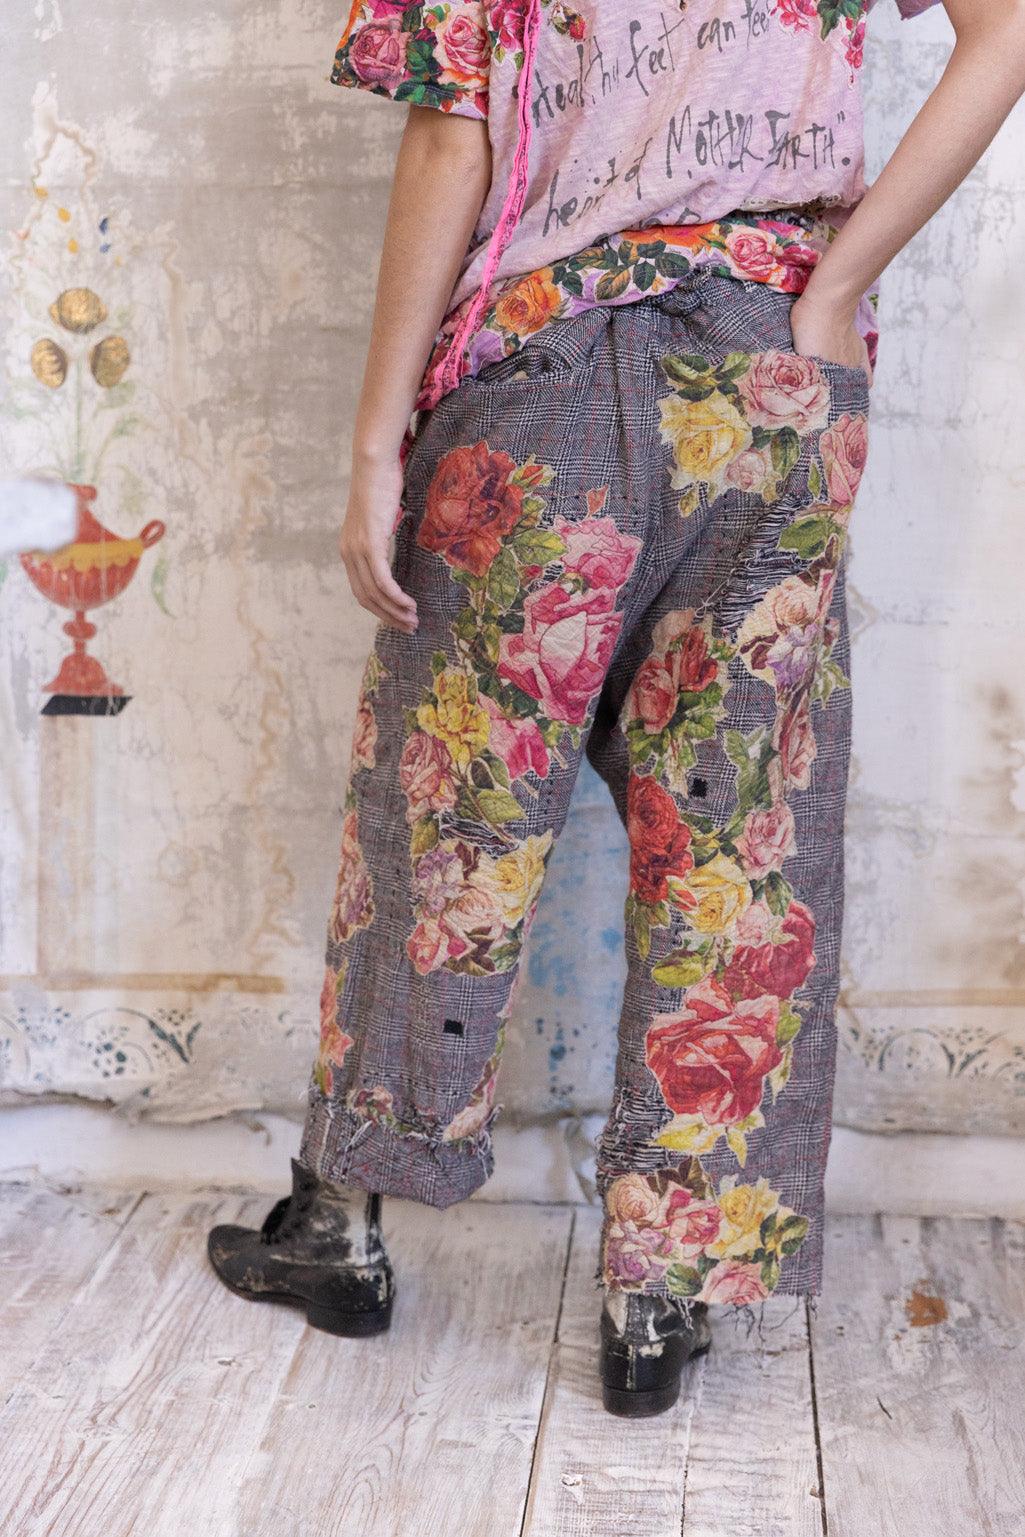 Magnolia Pearl Cotton Twill Miner Pants with Sunflower Applique